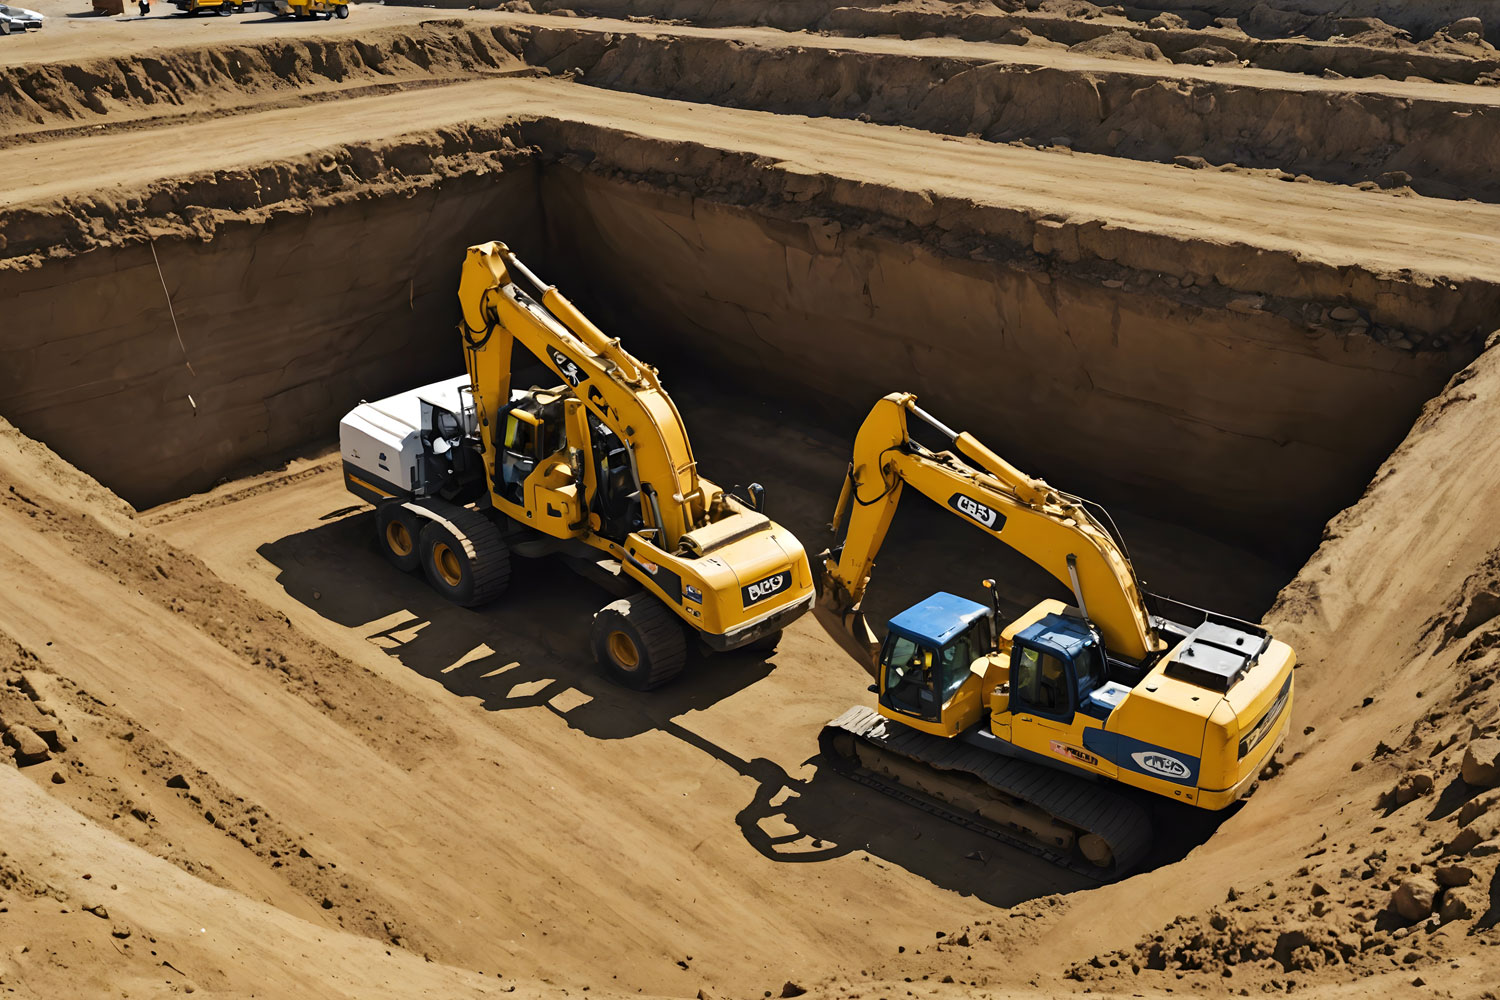 Excavation Safety: Best Practices and Regulations for Construction Sites